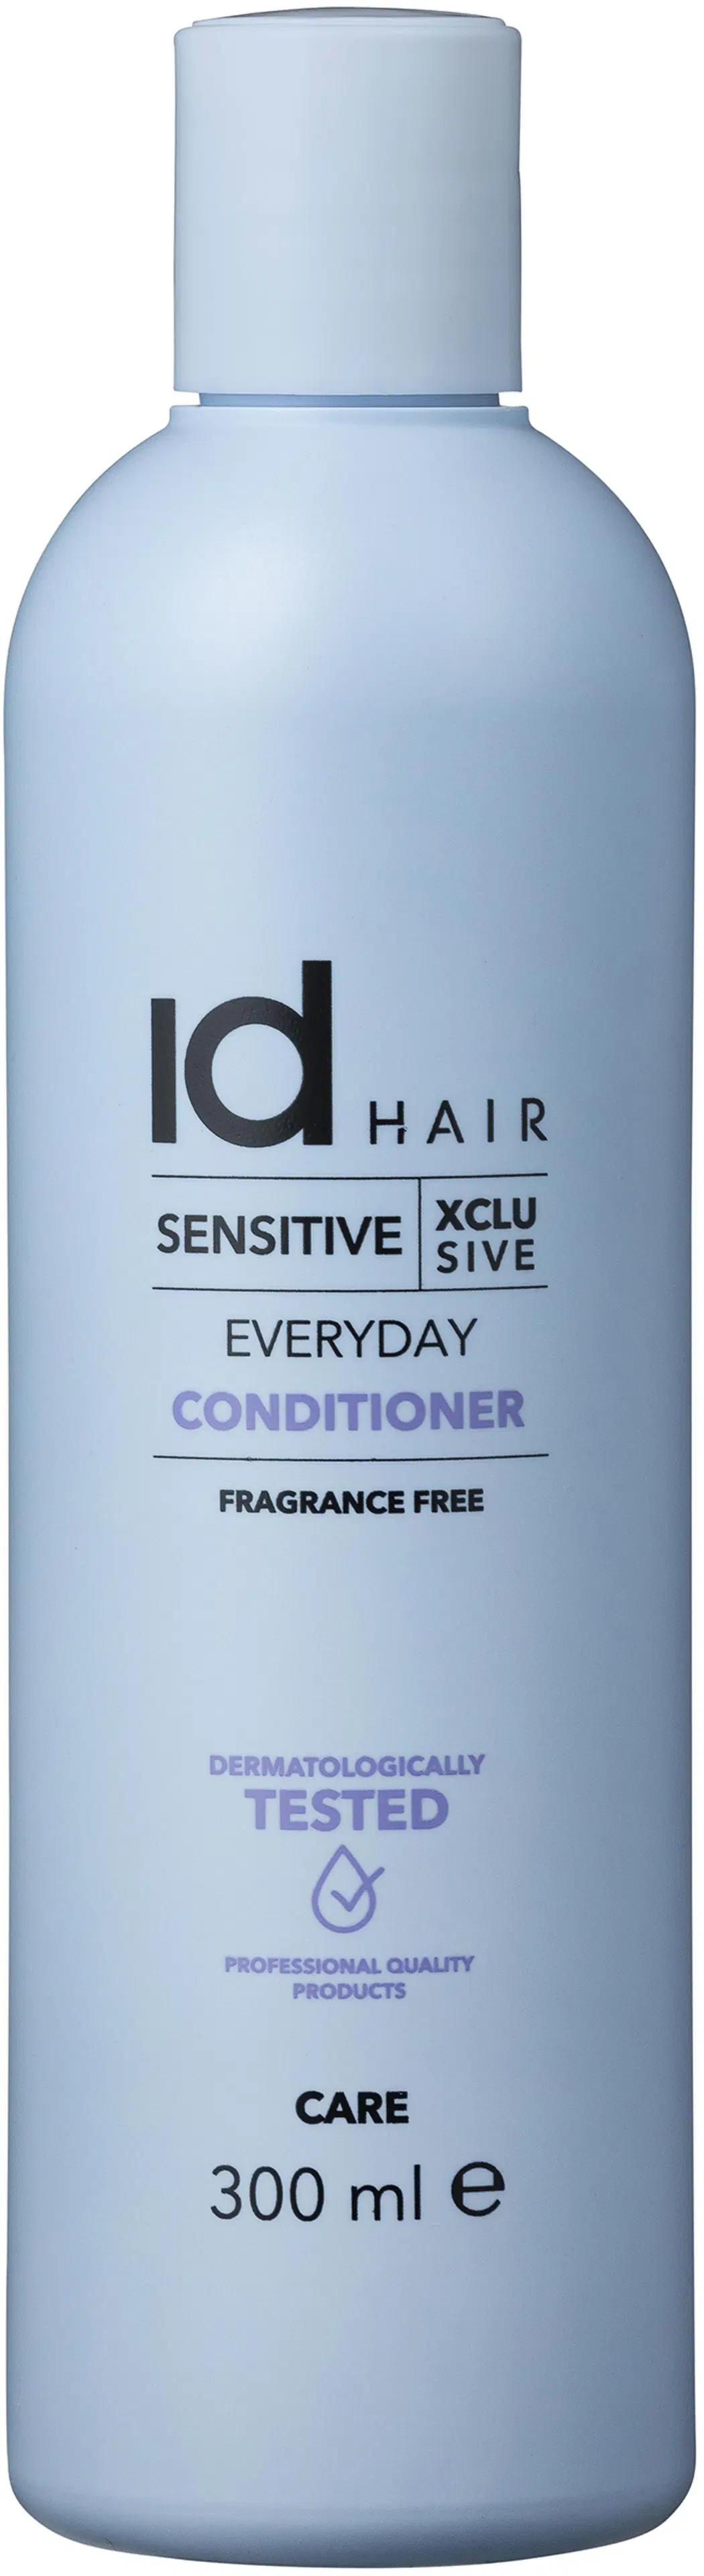 IdHAIR Sensitive Xclusive Everyday Conditioner hoitoaine 300 ml